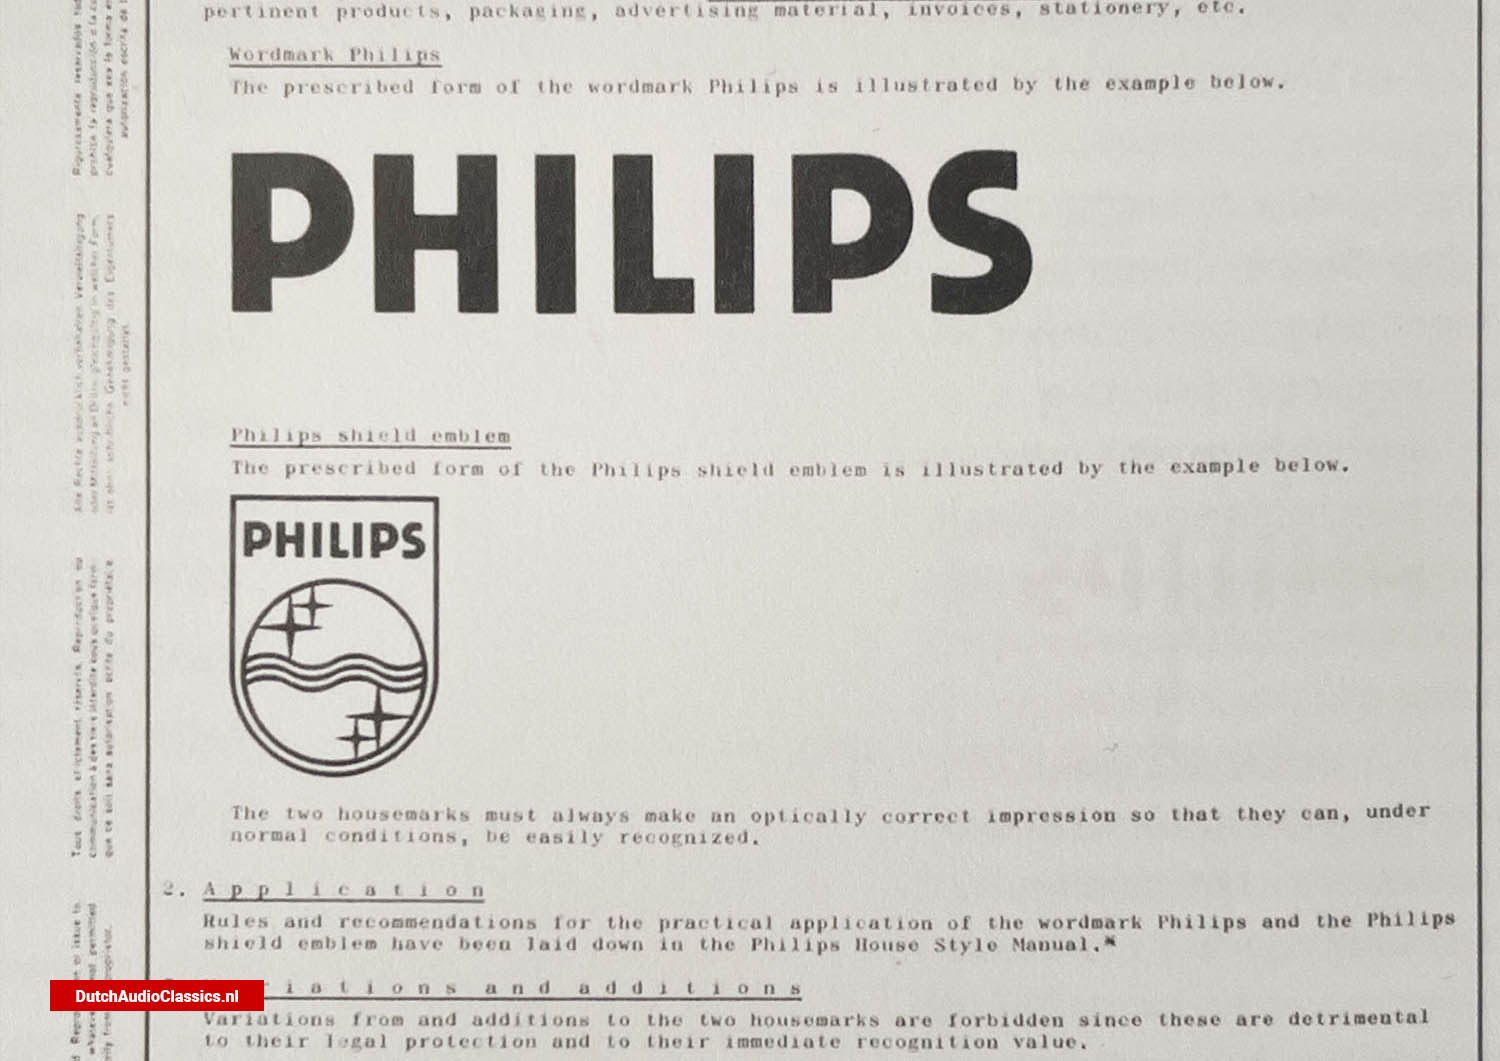 The Philips wordmark and shield emblem logo